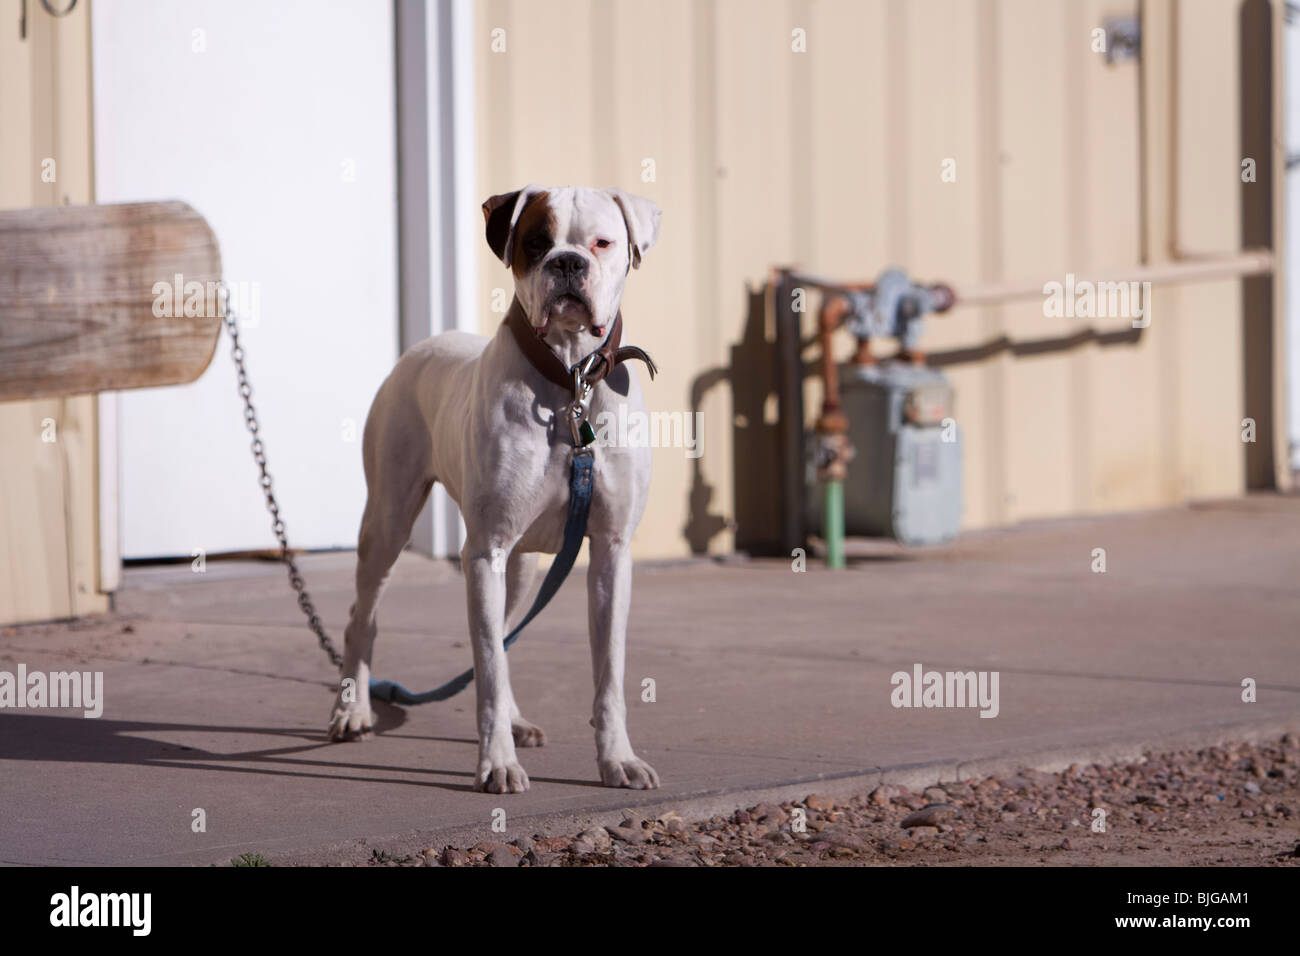 A Boxer dog chained up on the sidewalk. Shot from a public street. Stock Photo